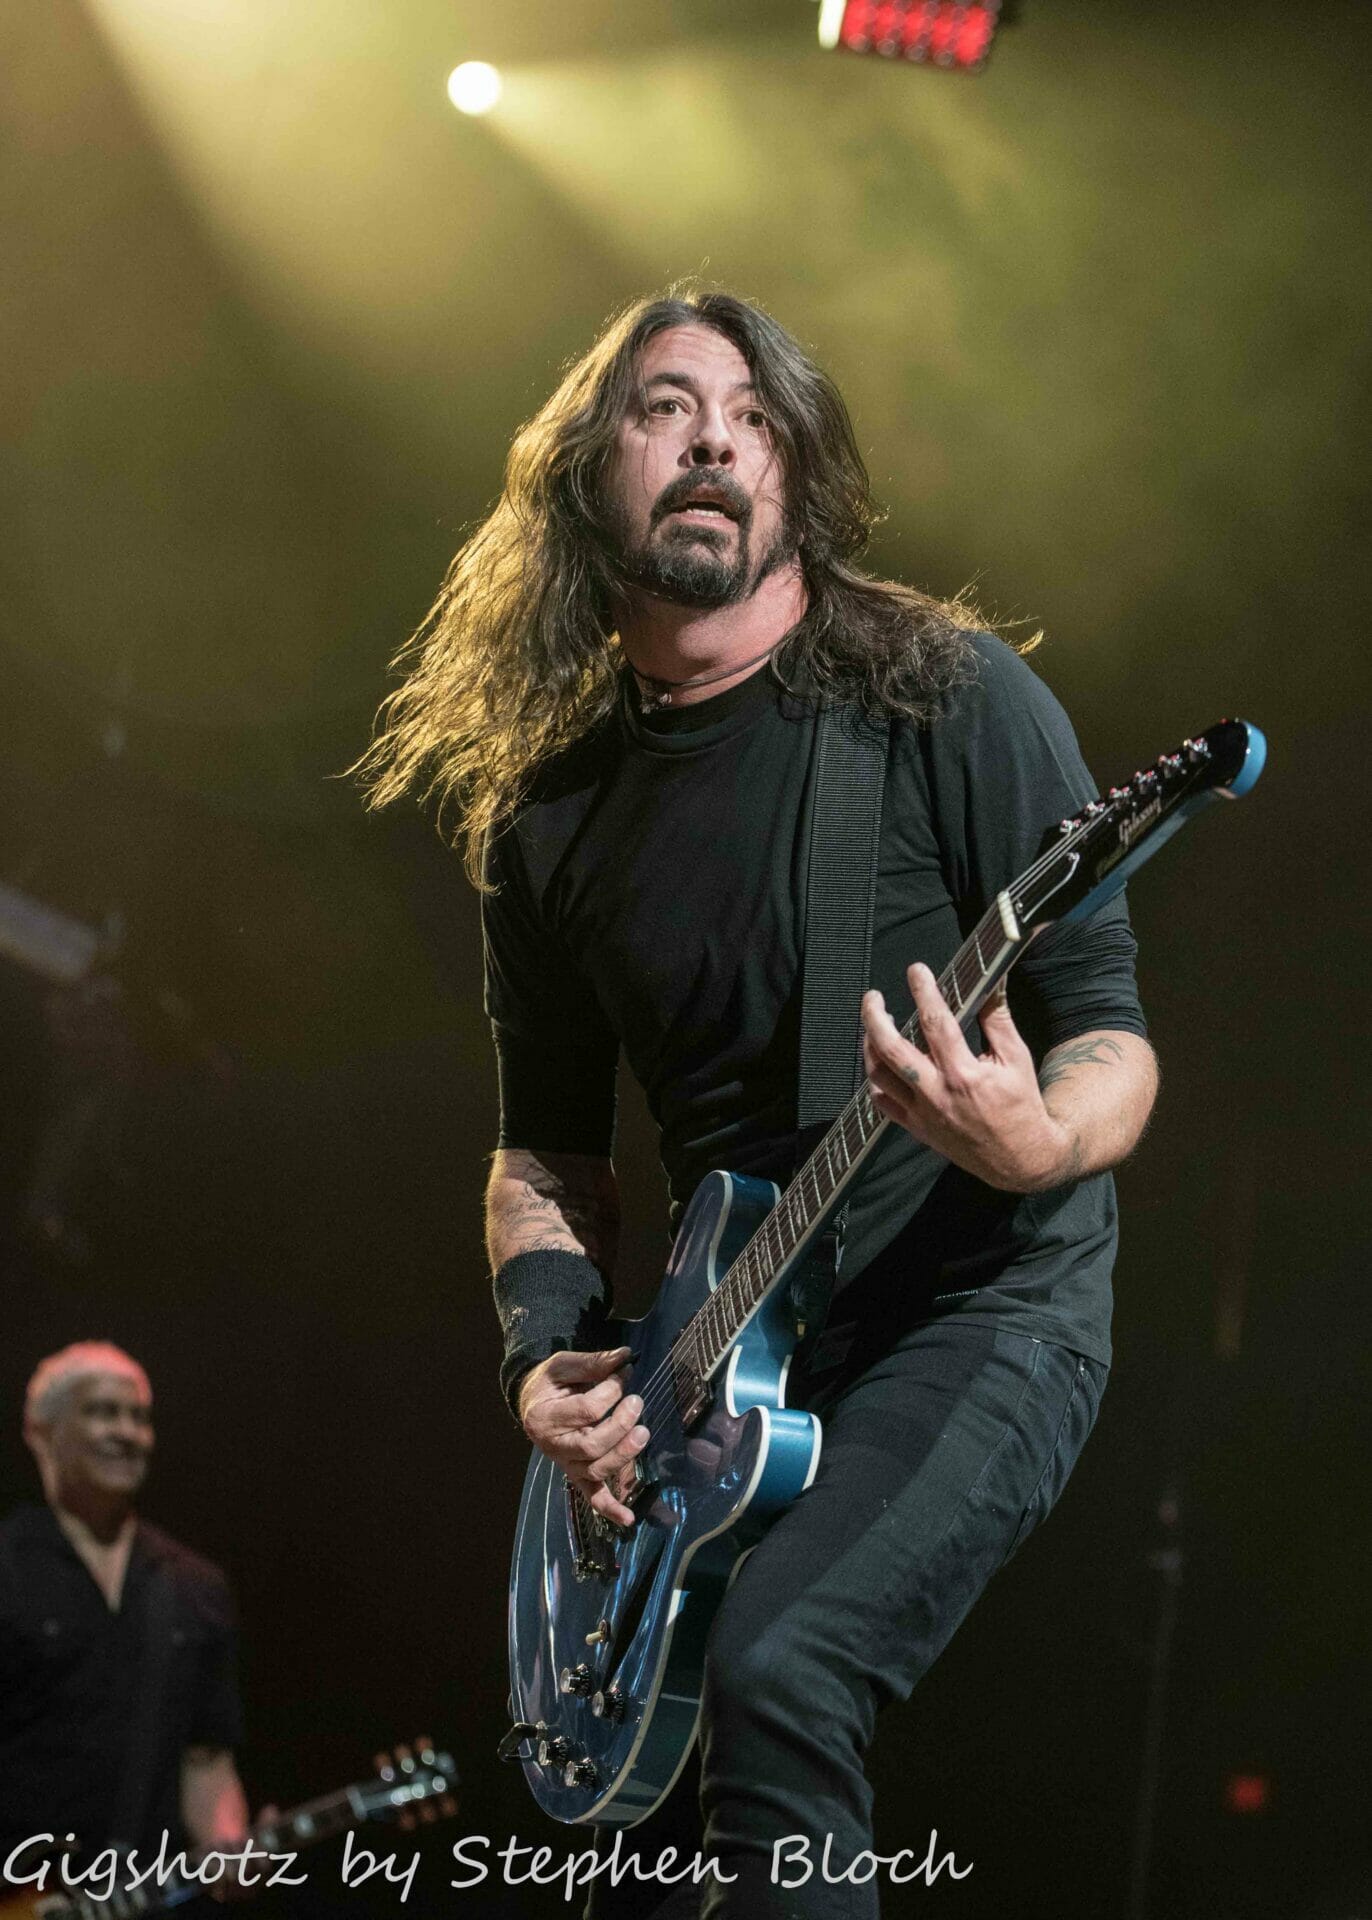 Watch: Foo Fighters Welcome Taylor Hawkins’ Son at Boston Calling